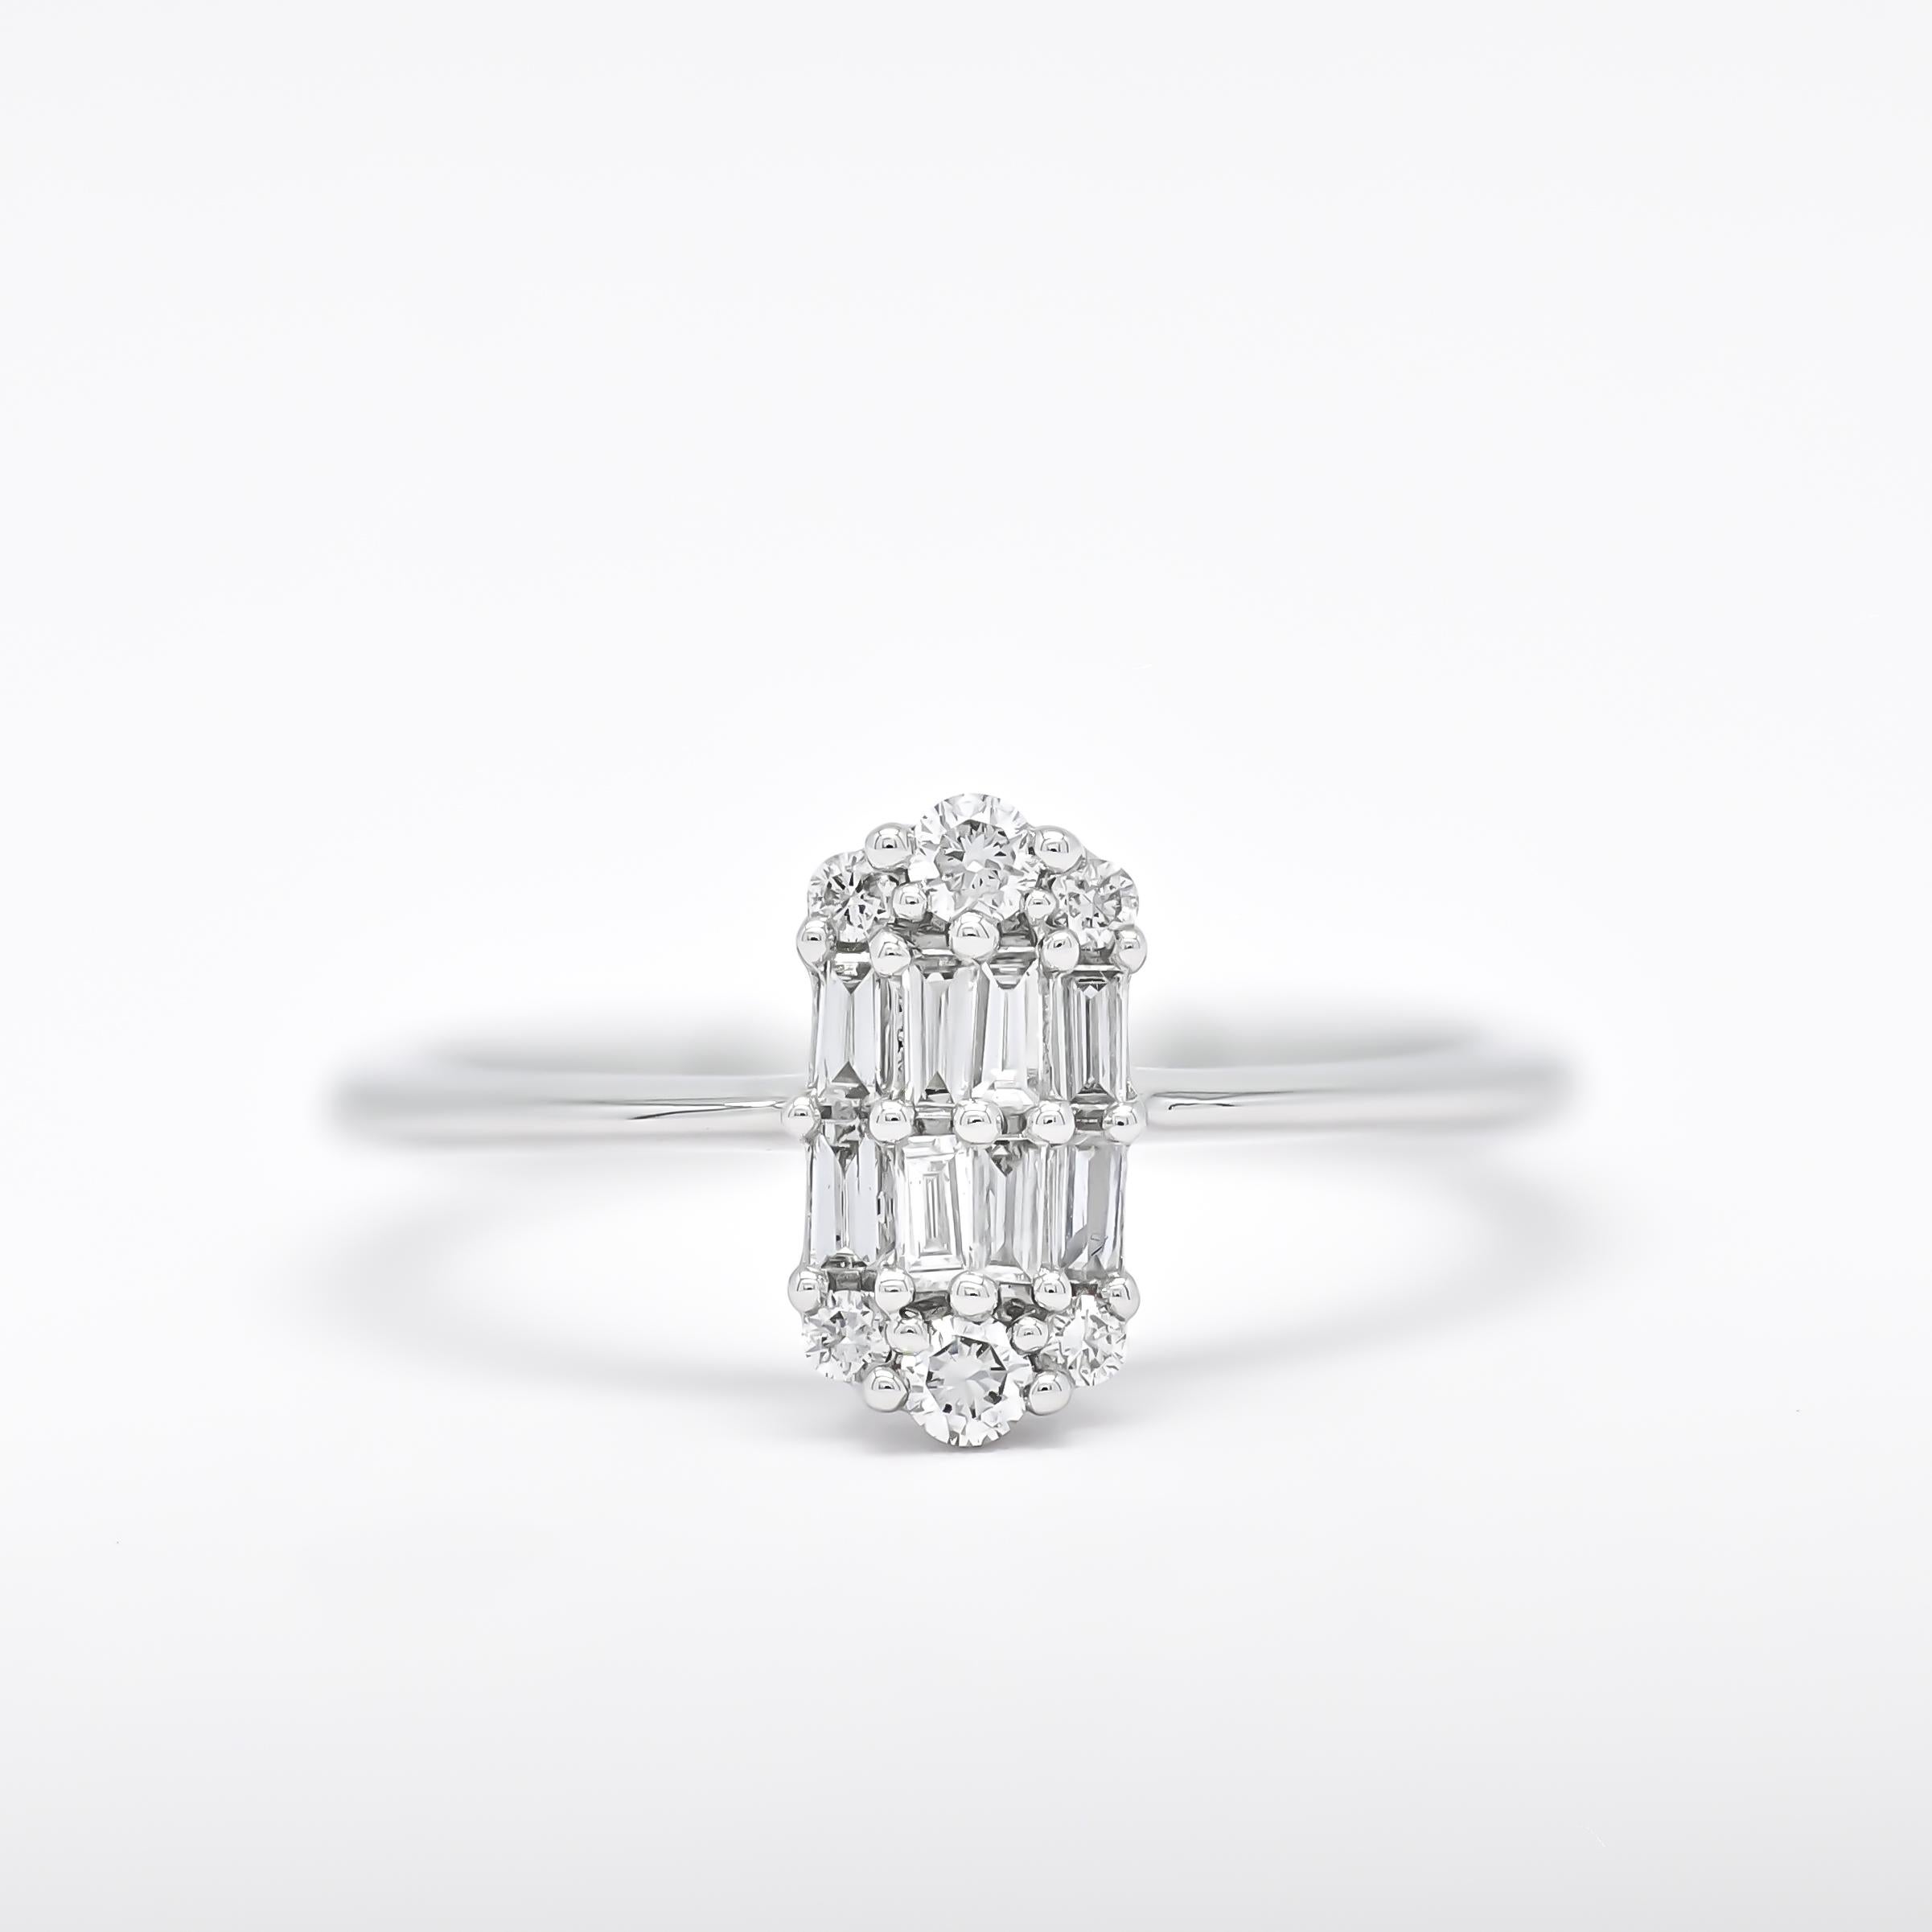 For Sale:   Natural Diamonds 0.23 ct in 18 Karat white Gold Cluster Art Deco Ring 6